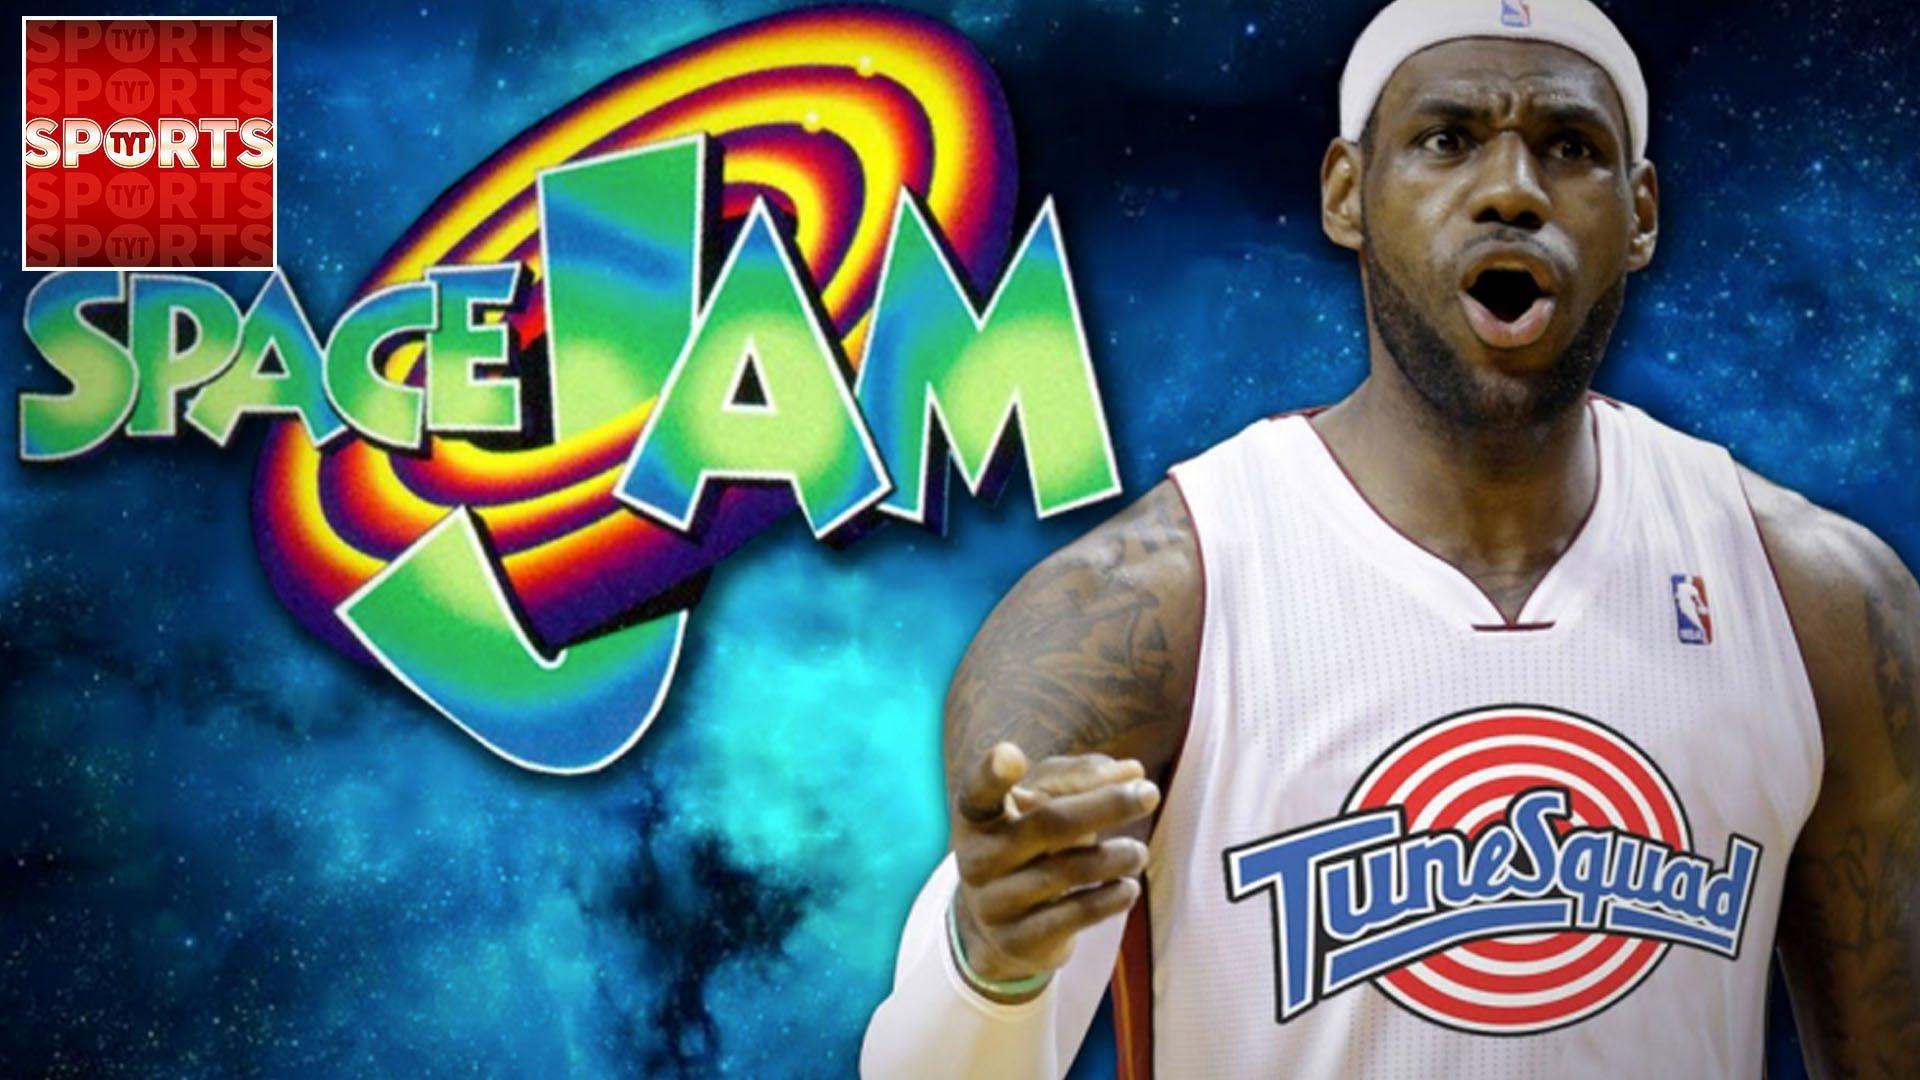 SPACE JAM 2 IS COMING [Best Plot Lines for LeBron James]